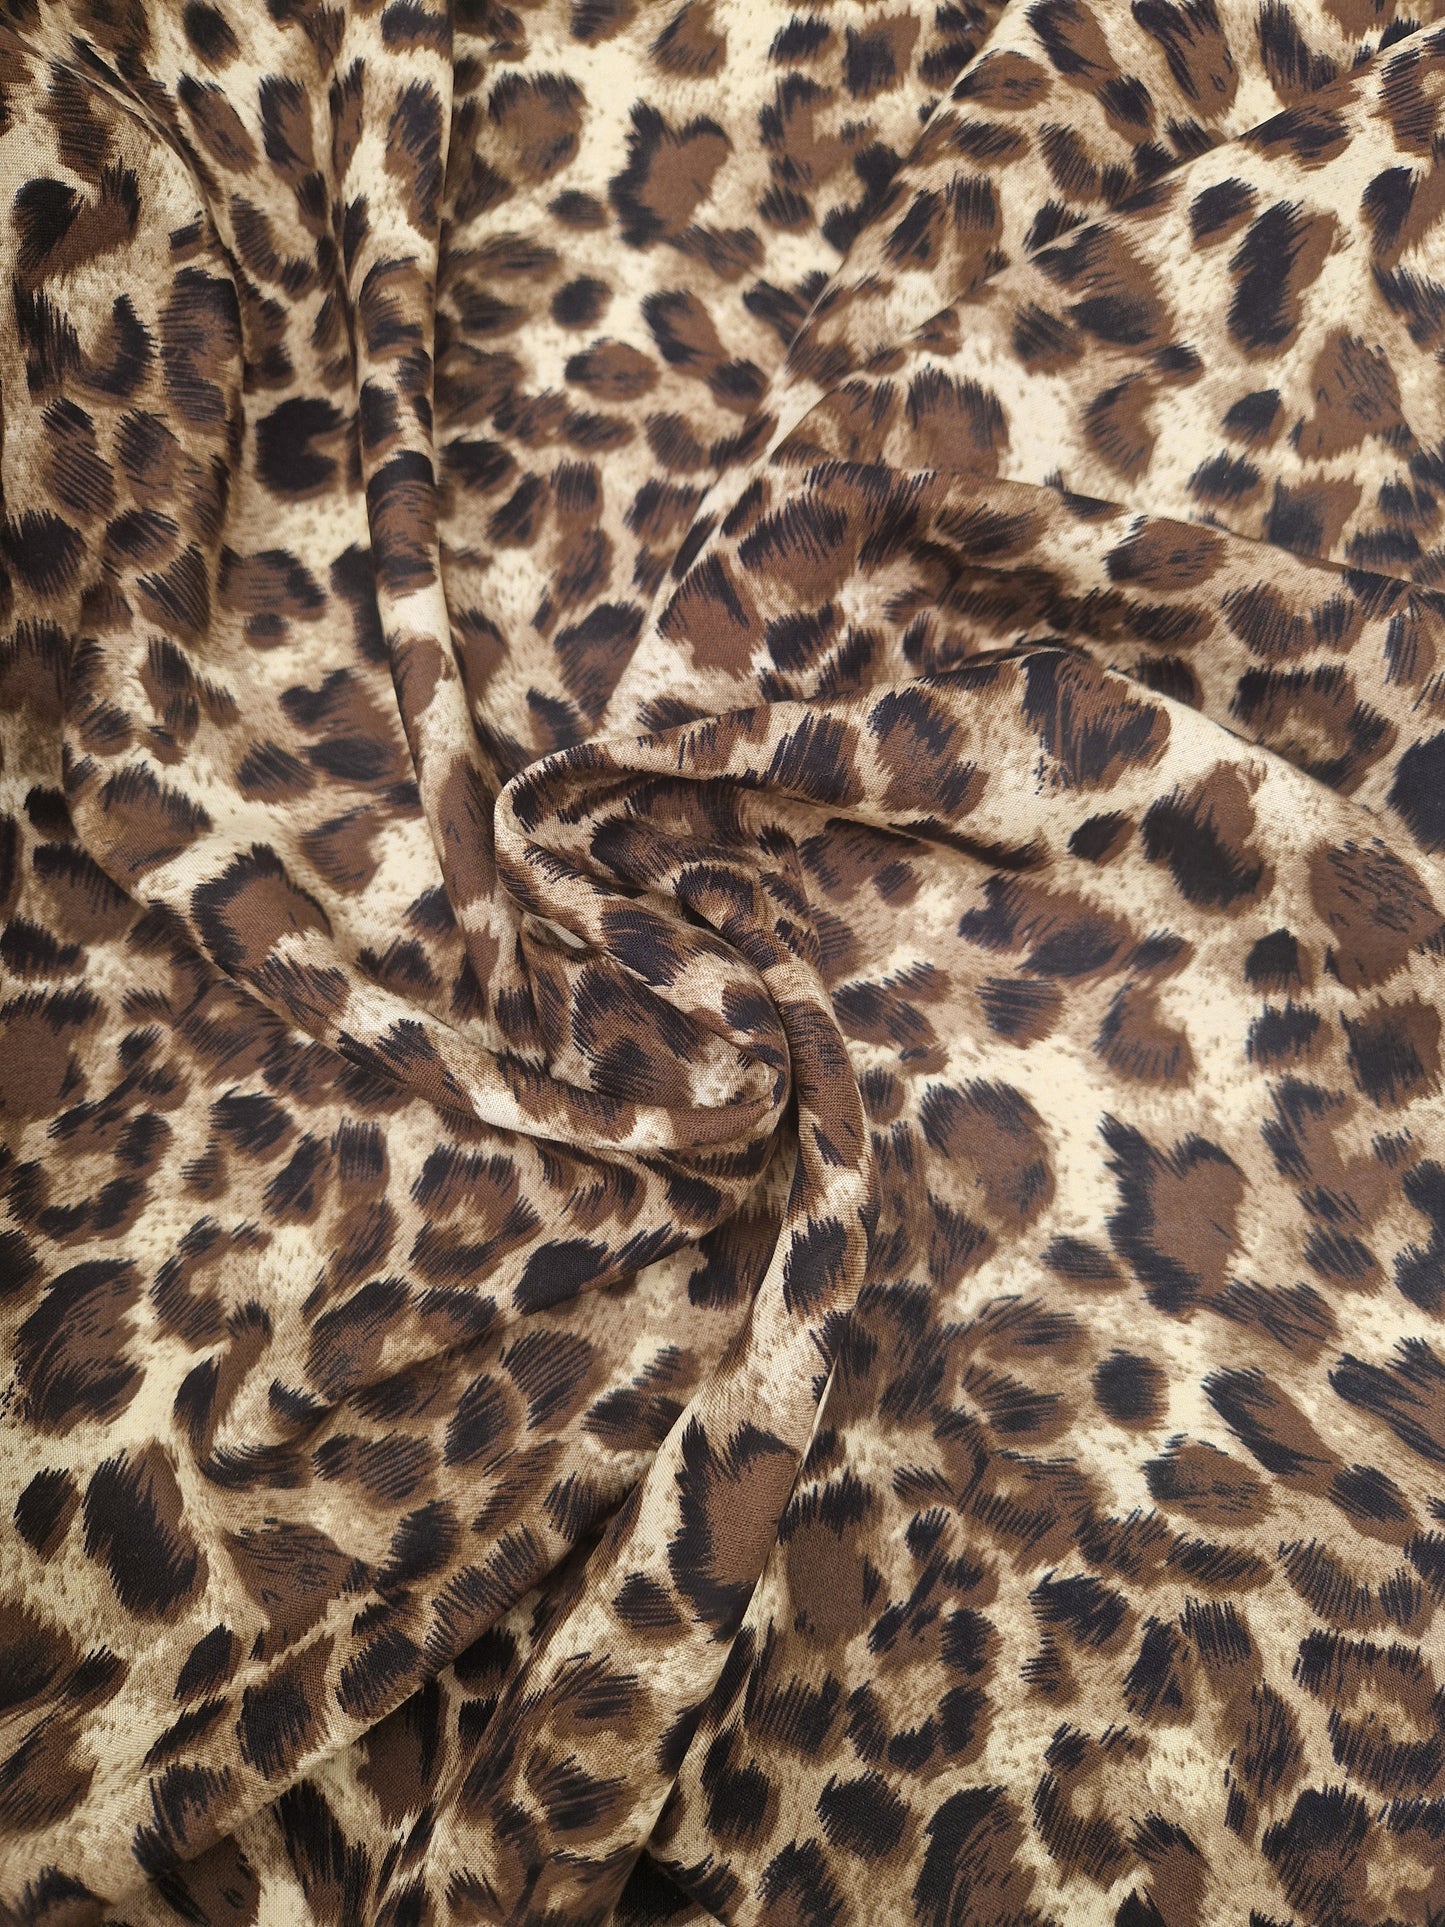 Viscose - Leopard print 58" wide - Sold by the metre